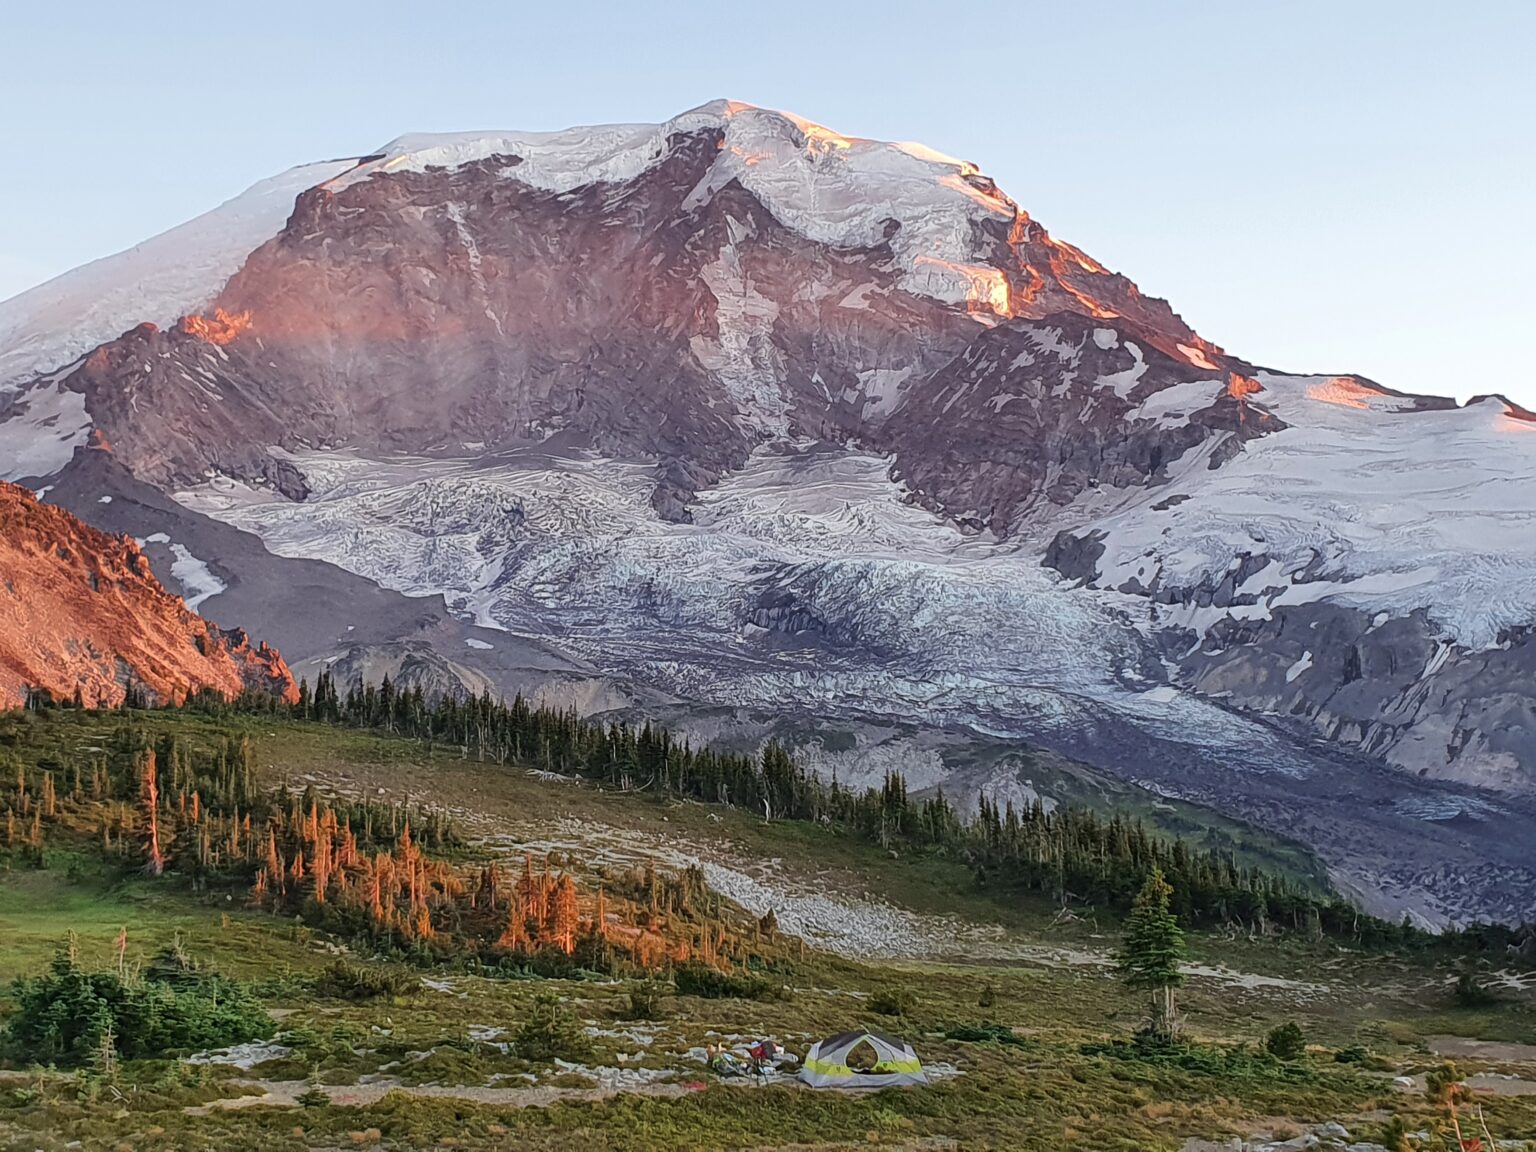 Enjoying one of the best camping spots in Mount Rainier National Park sleeping up in Moraine Park with the sunset alpenglow over the Willis Wall